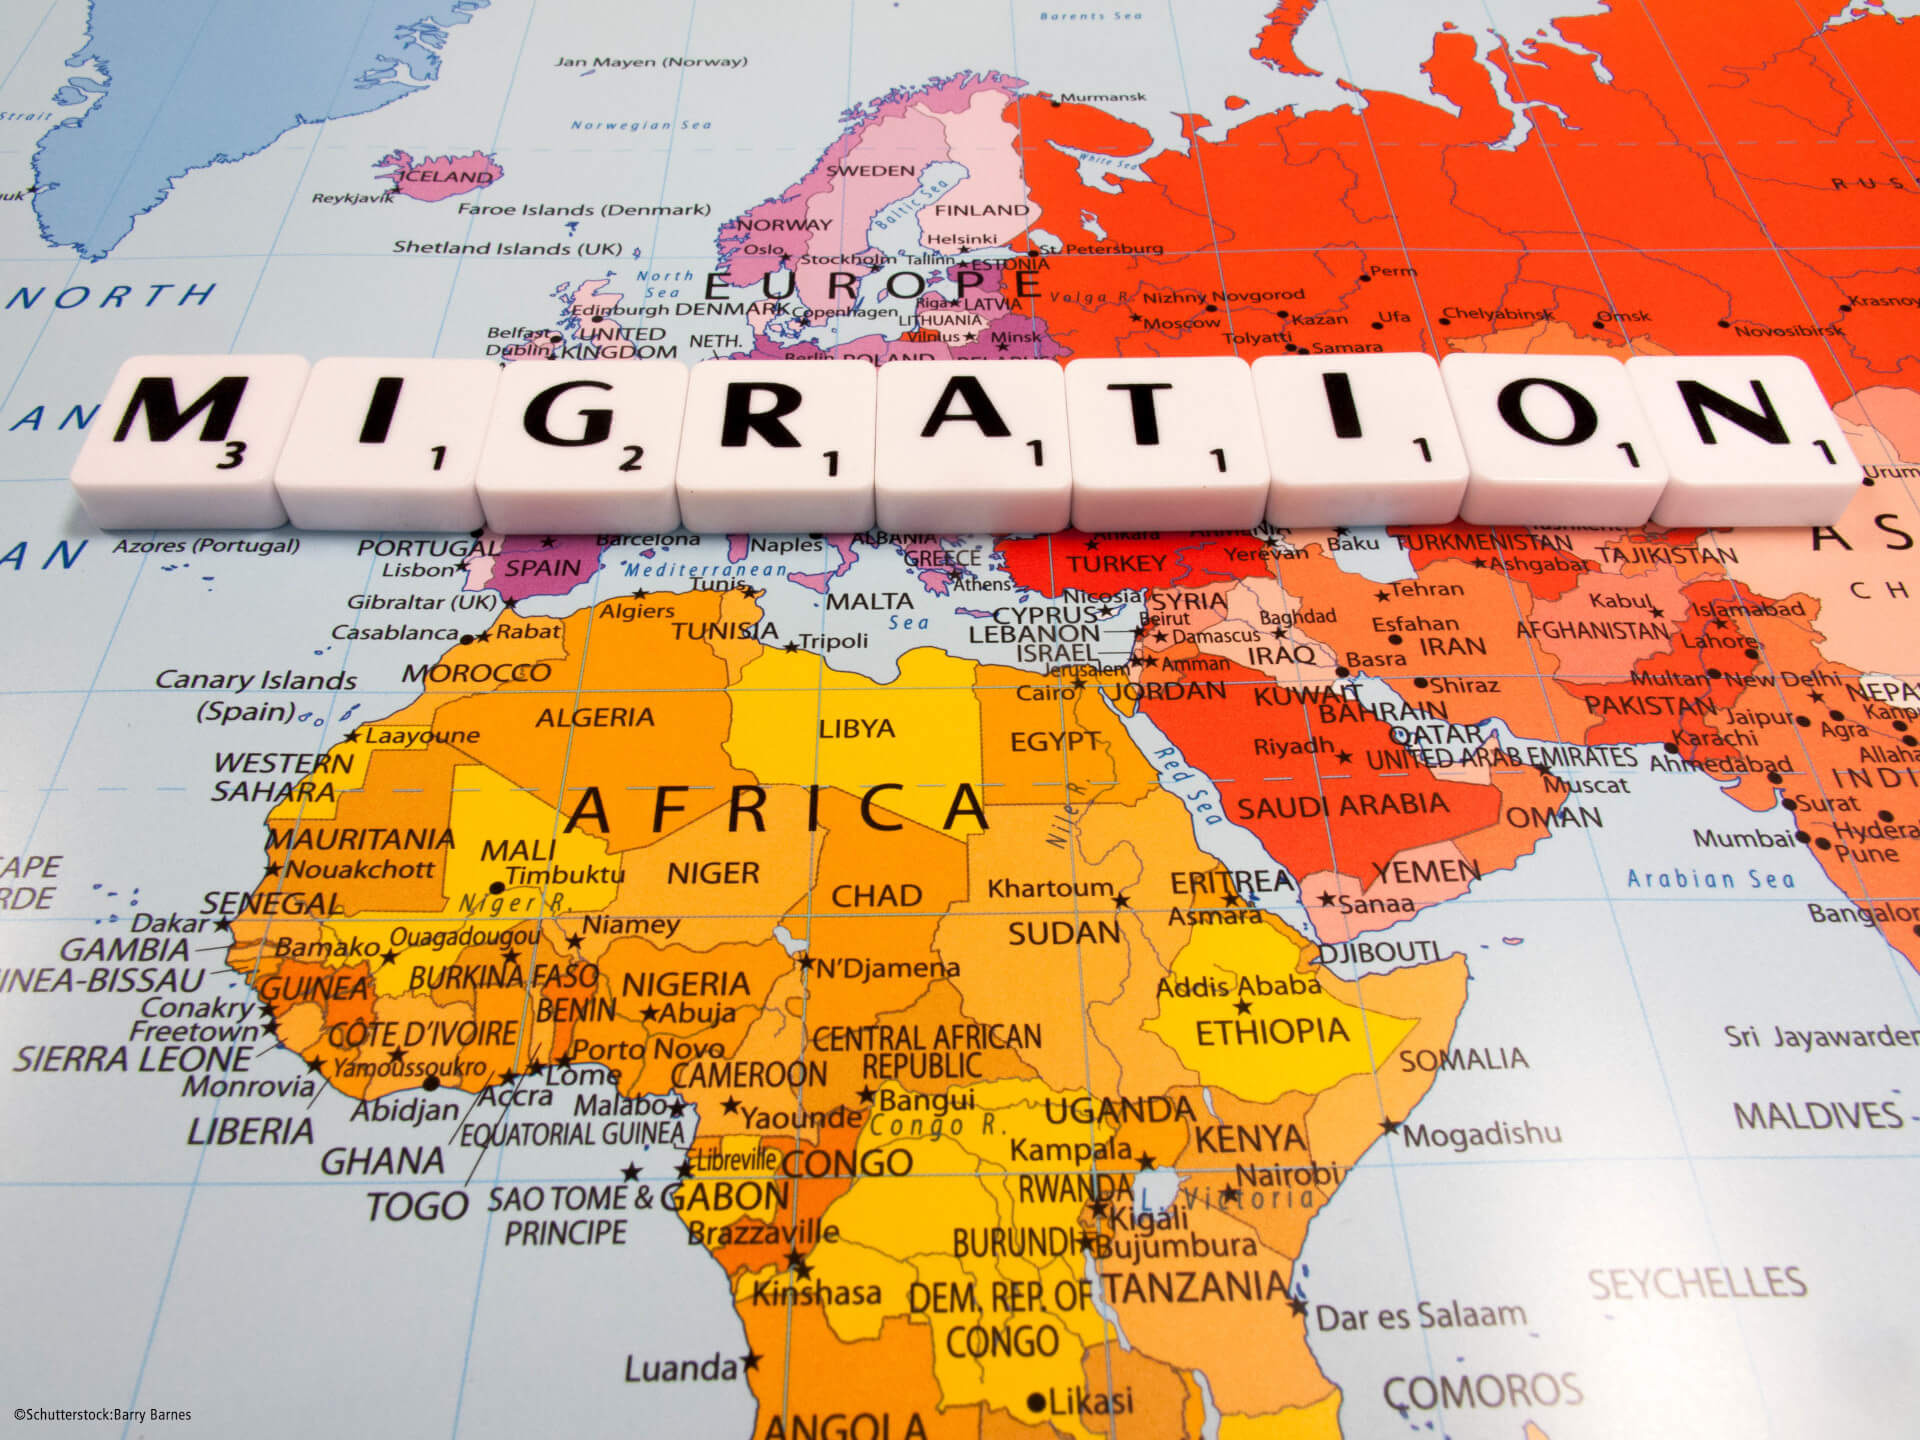 Mpc Blog African And European Migration Diplomacy A Checklist And Suggested Future Direction